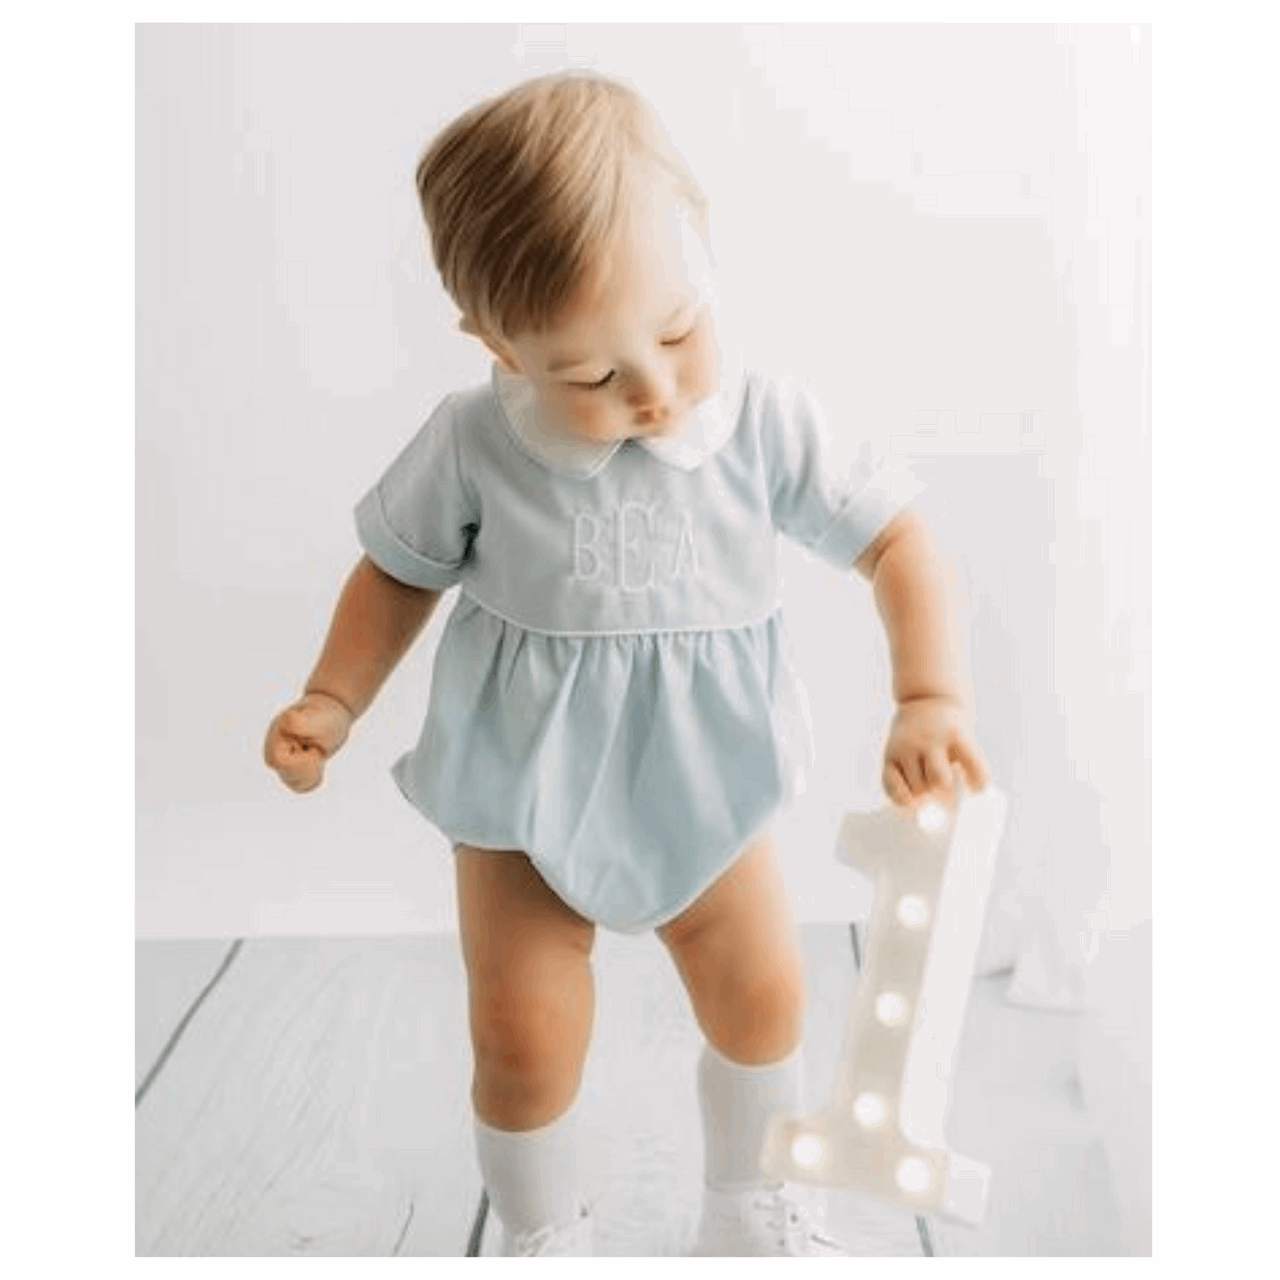 Boys Monogrammed Bubble Romper Blue with White Collar